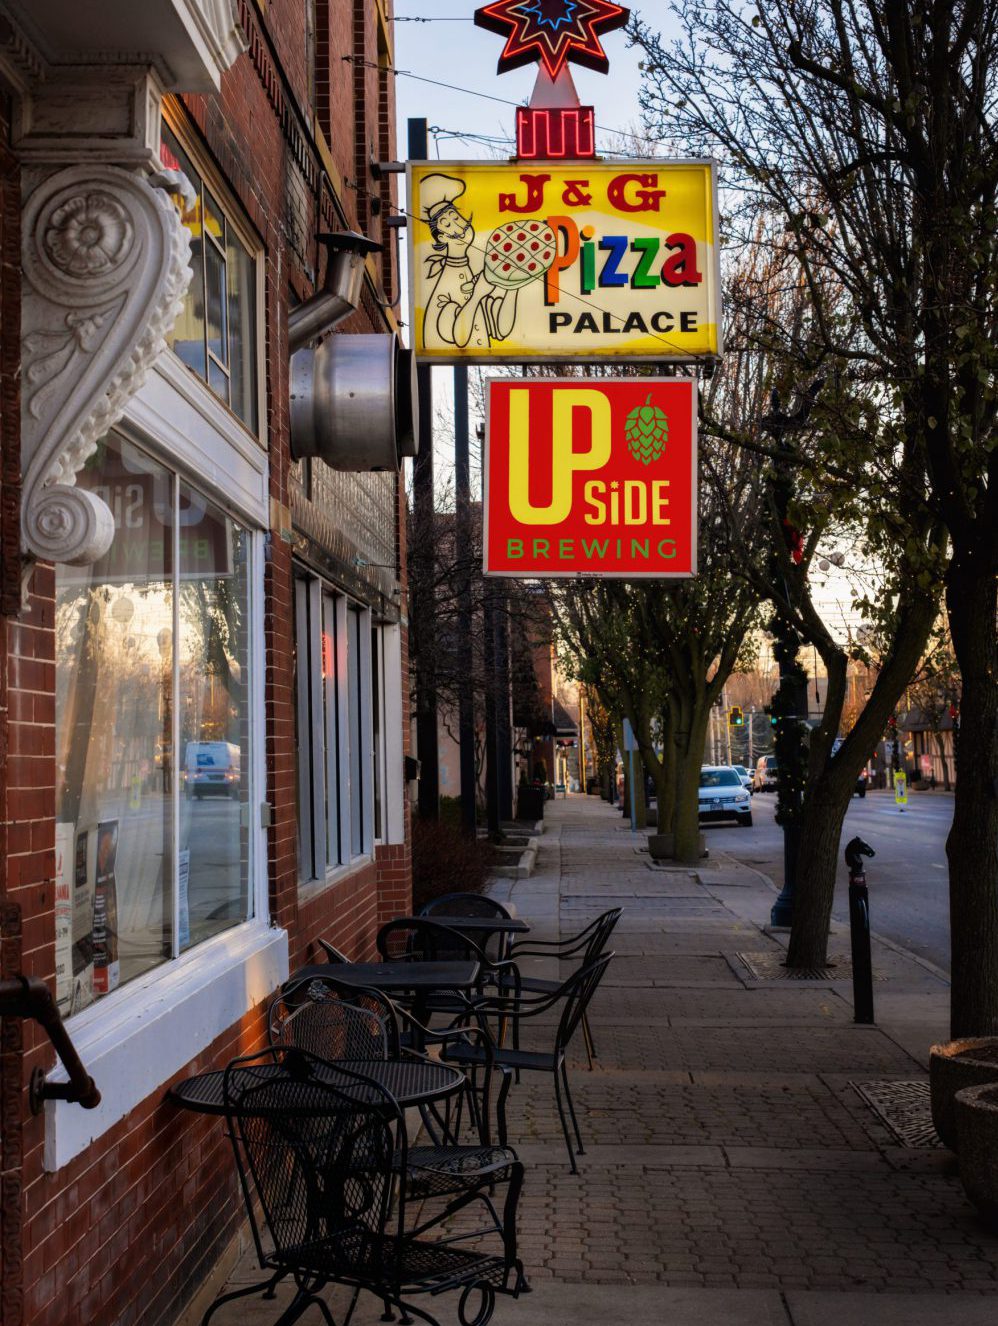 J&G Pizza and Upside Brewing sign at evening time